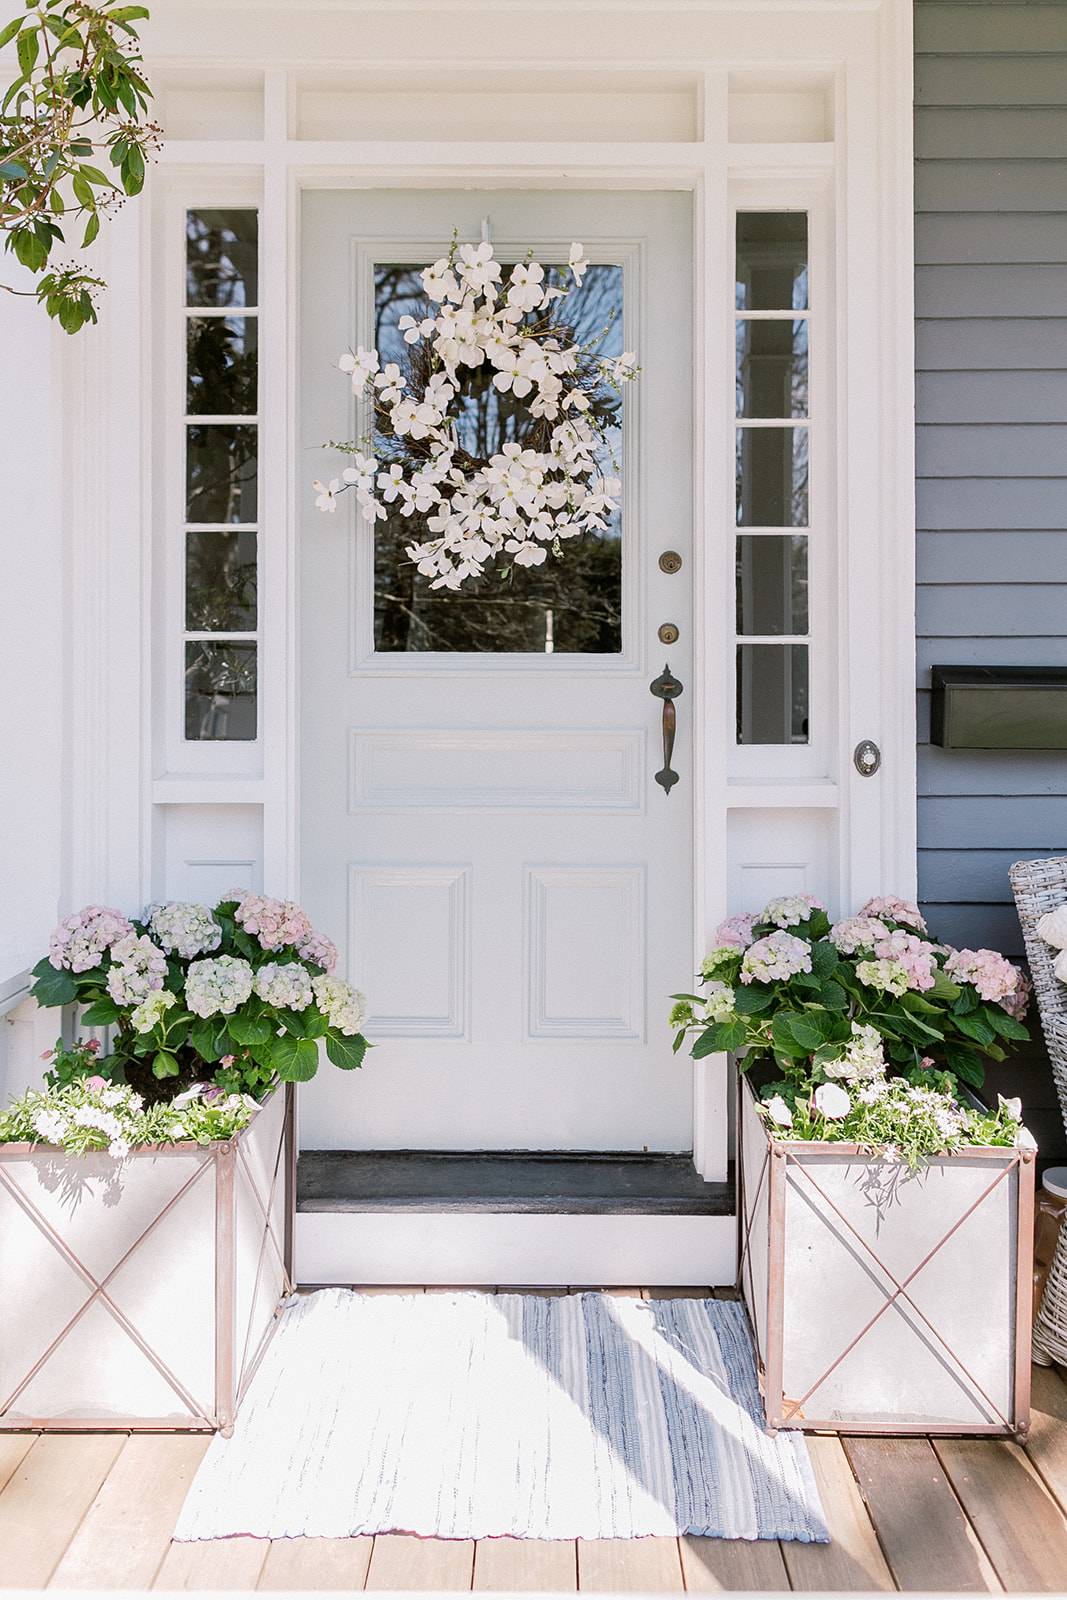 Spruce up your front door in spring vibes (from Finding Lovely)